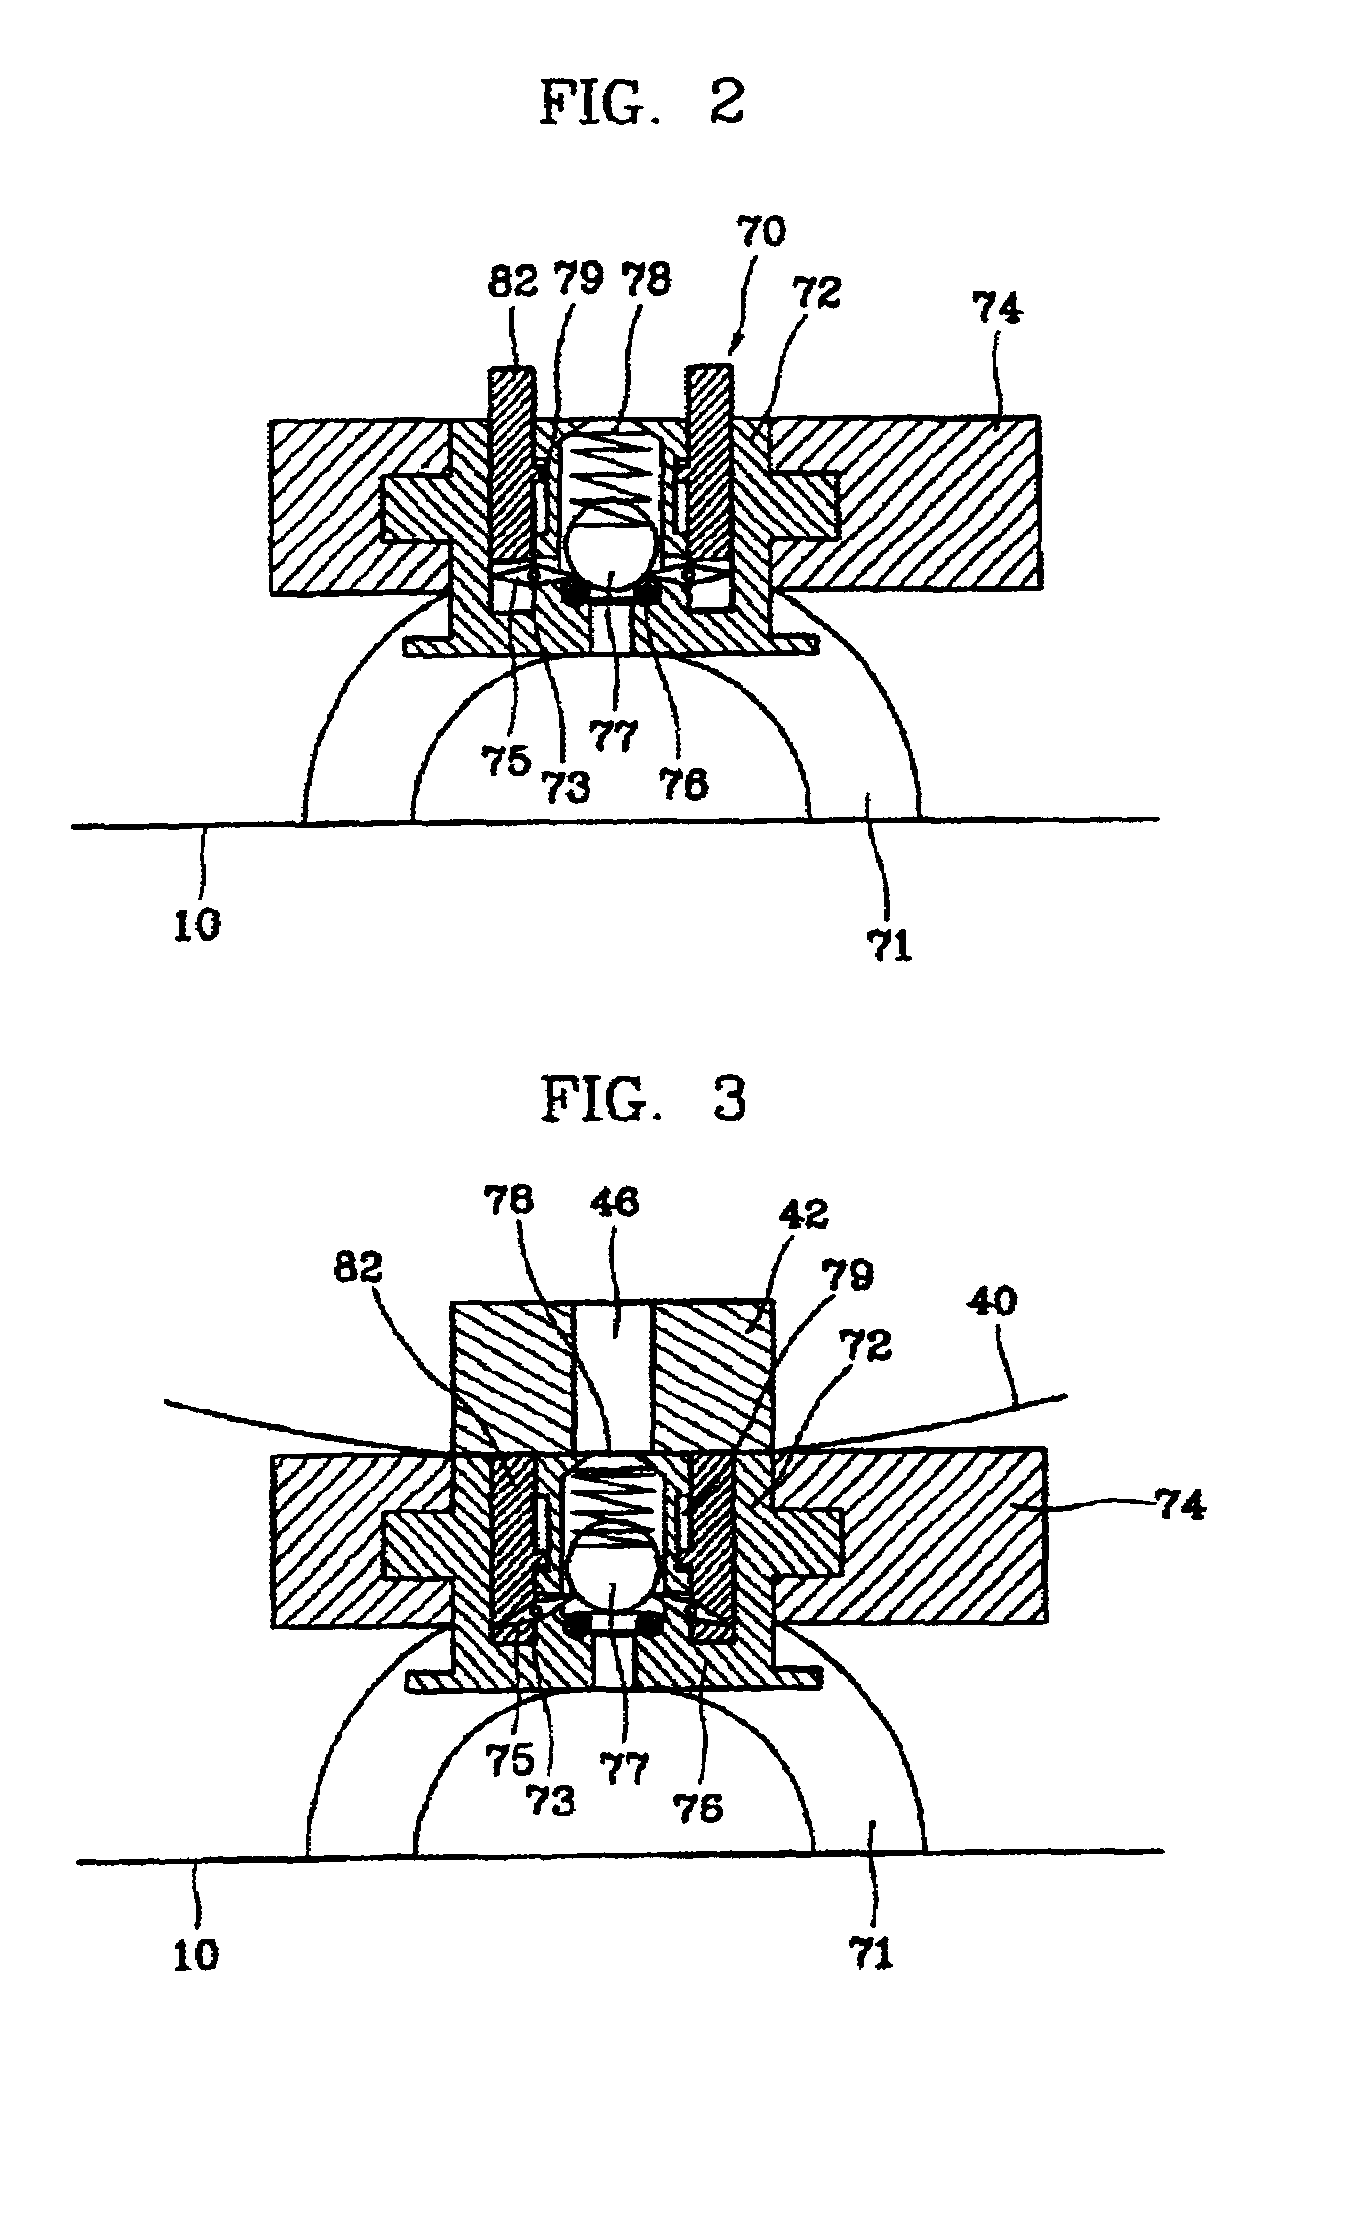 Surface-traveling mobile apparatus and cleaning apparatus using the same